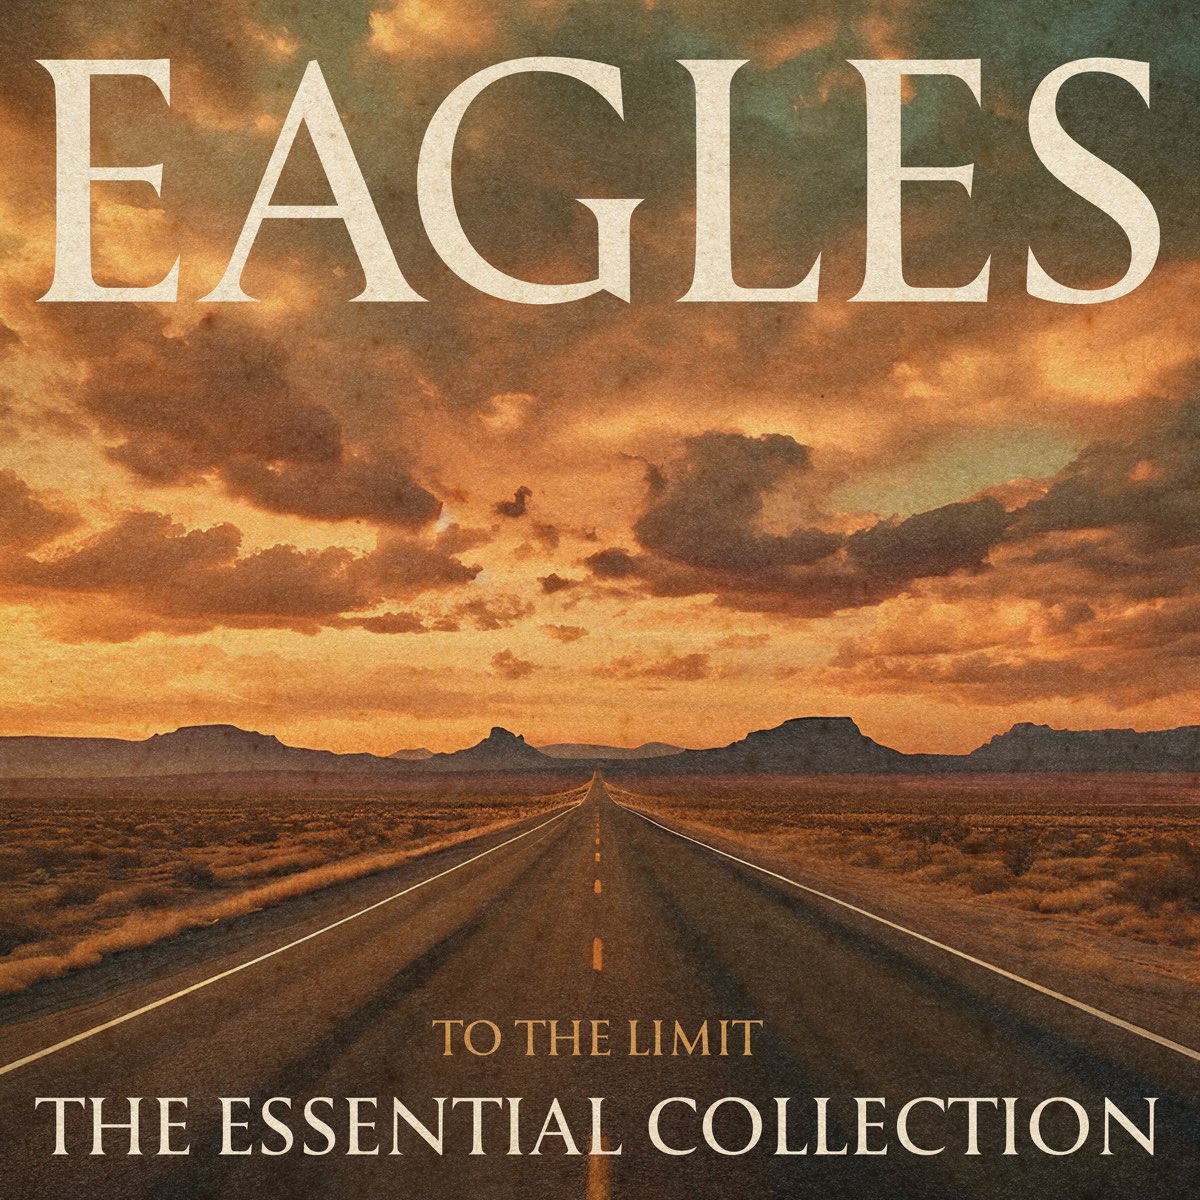 ‎to The Limit The Essential Collection Album By Eagles Apple Music 3068